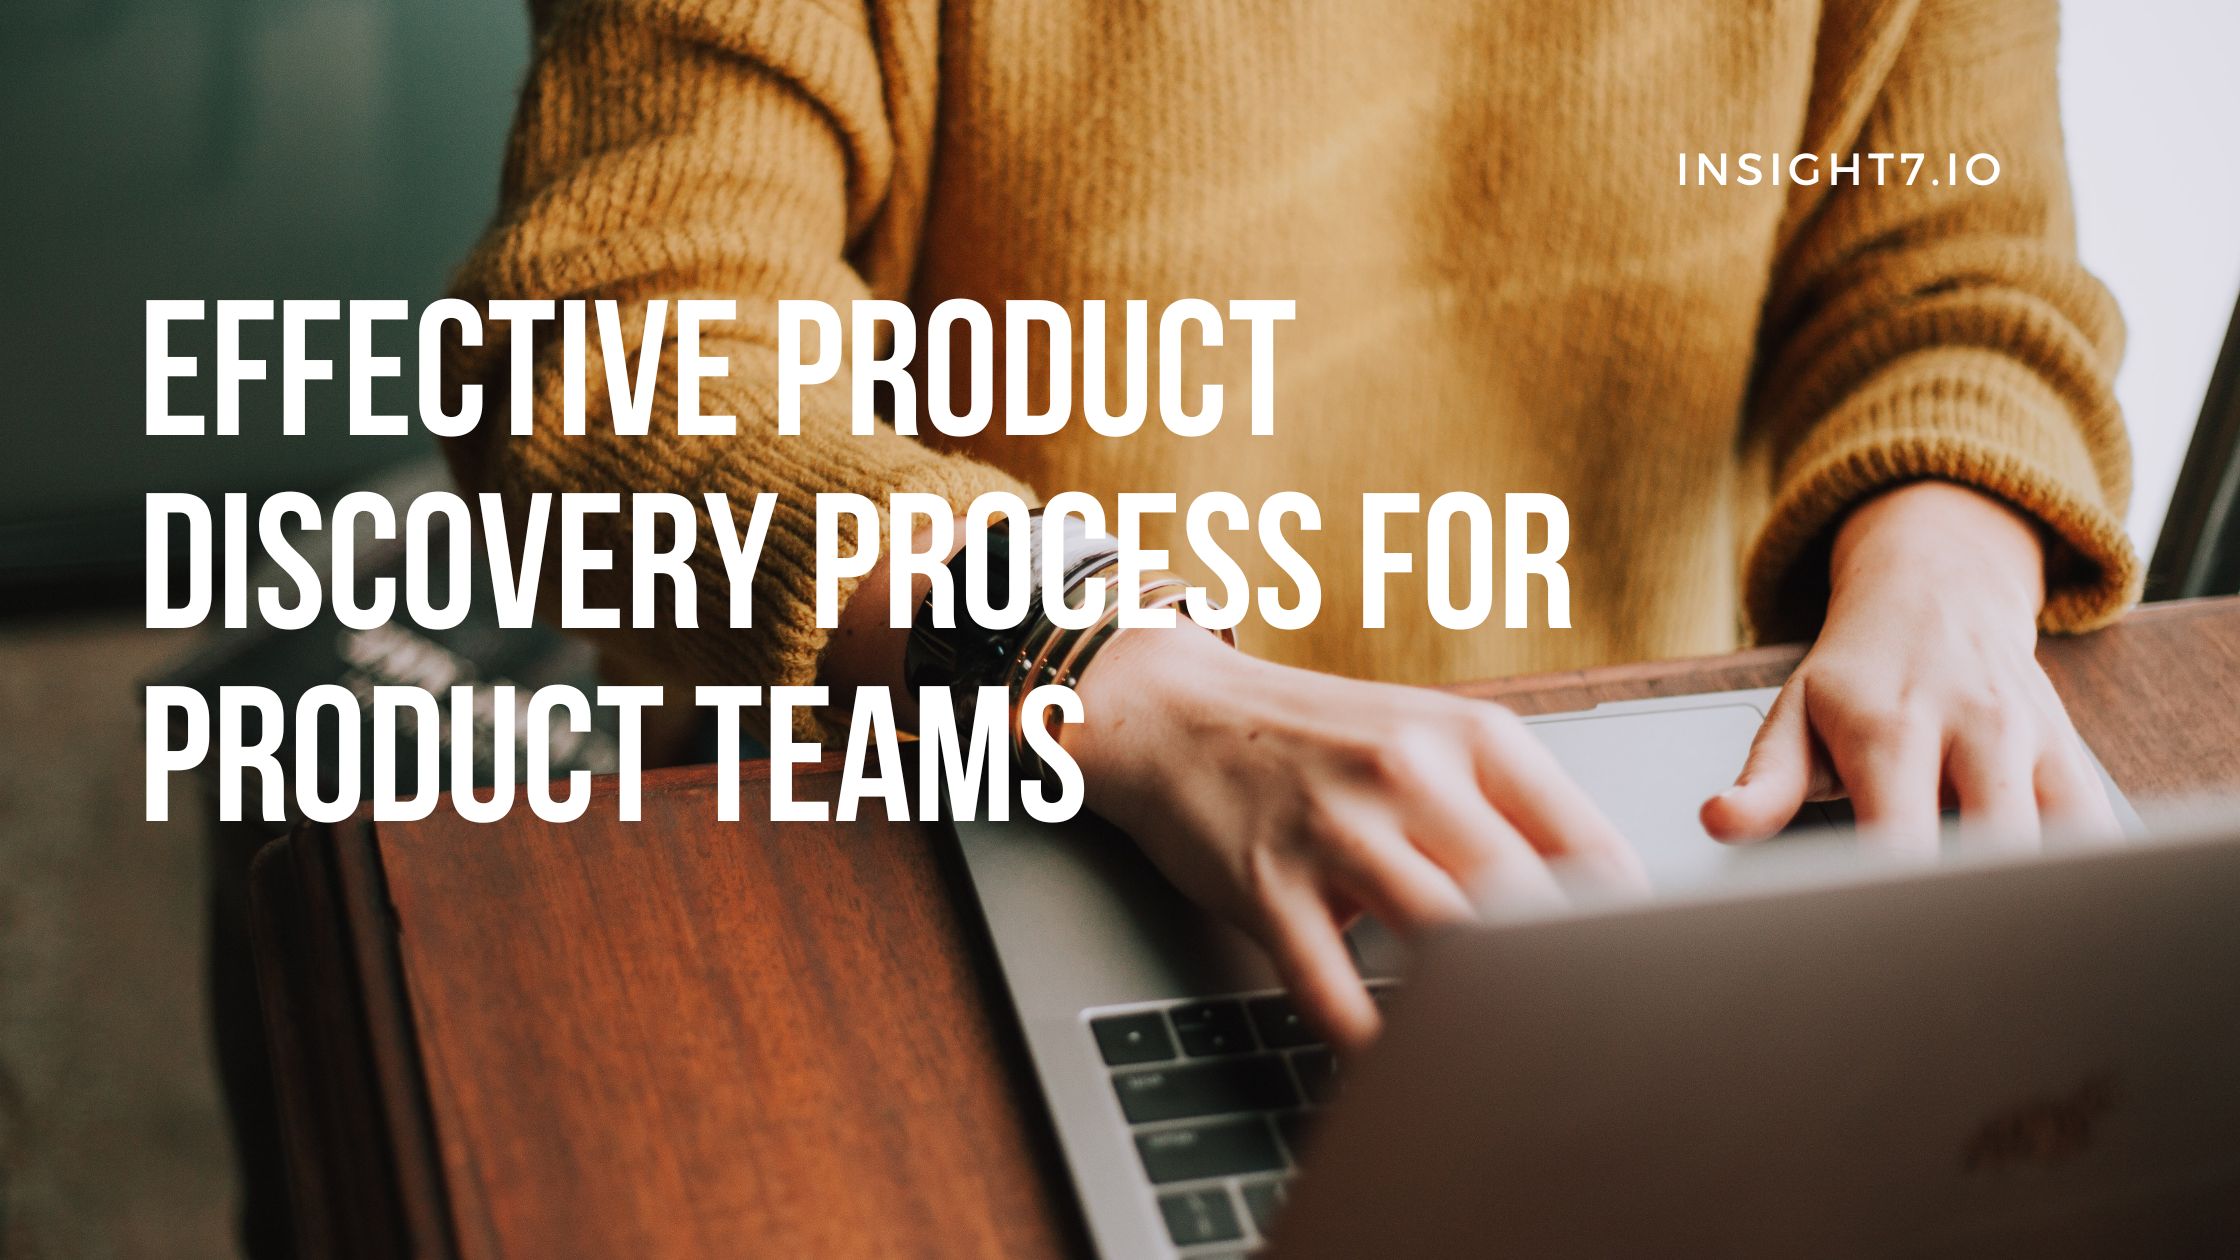 Effective Product Discovery Process For Product Teams